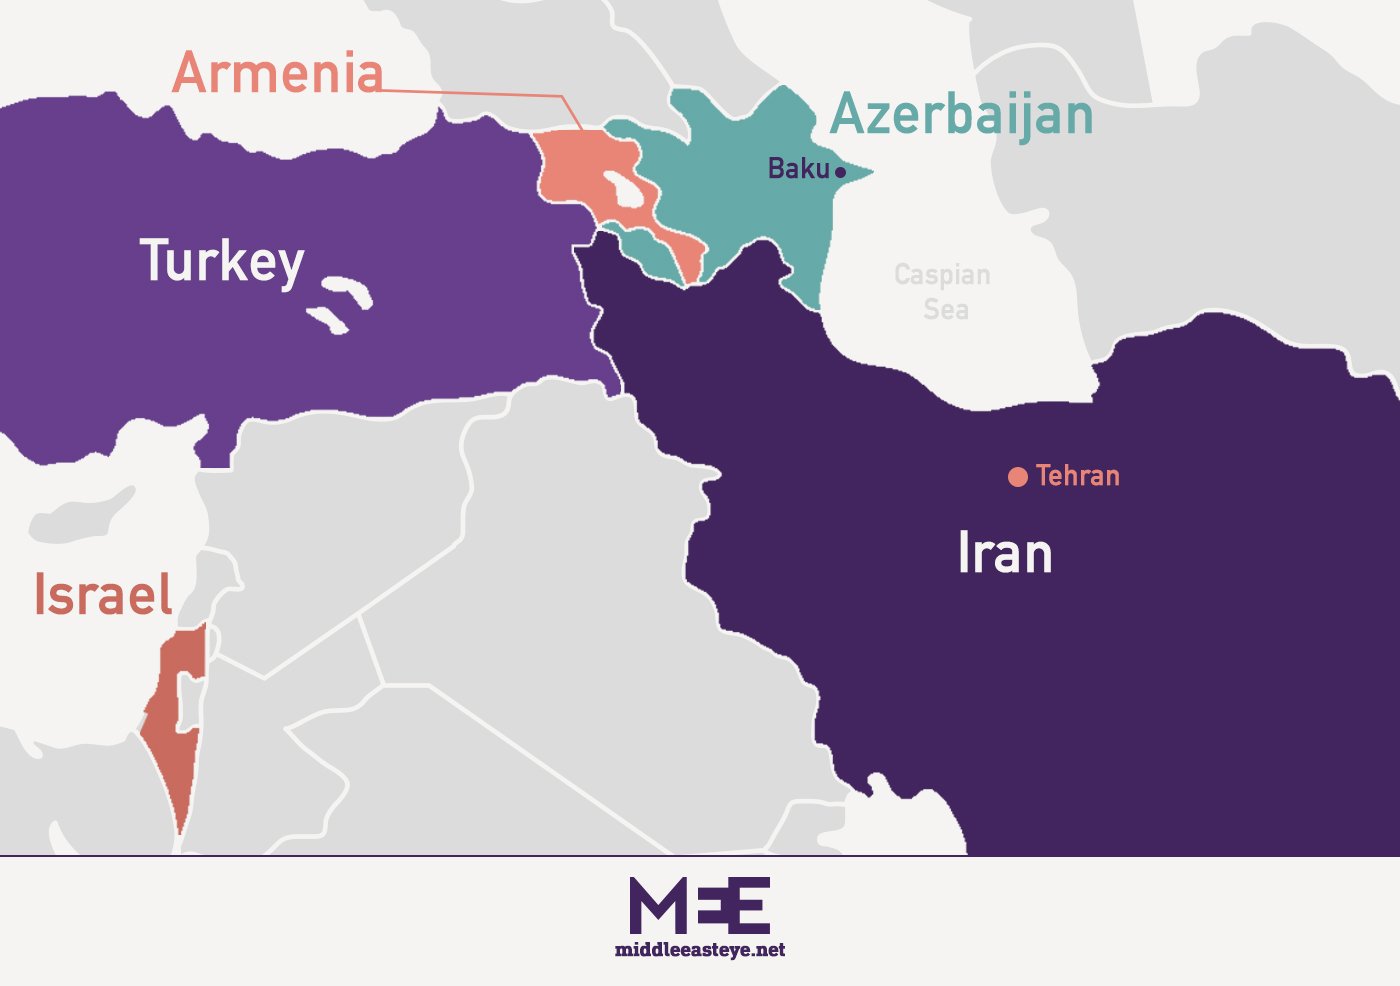 Iran-Azerbaijan: What is behind the recent tensions?